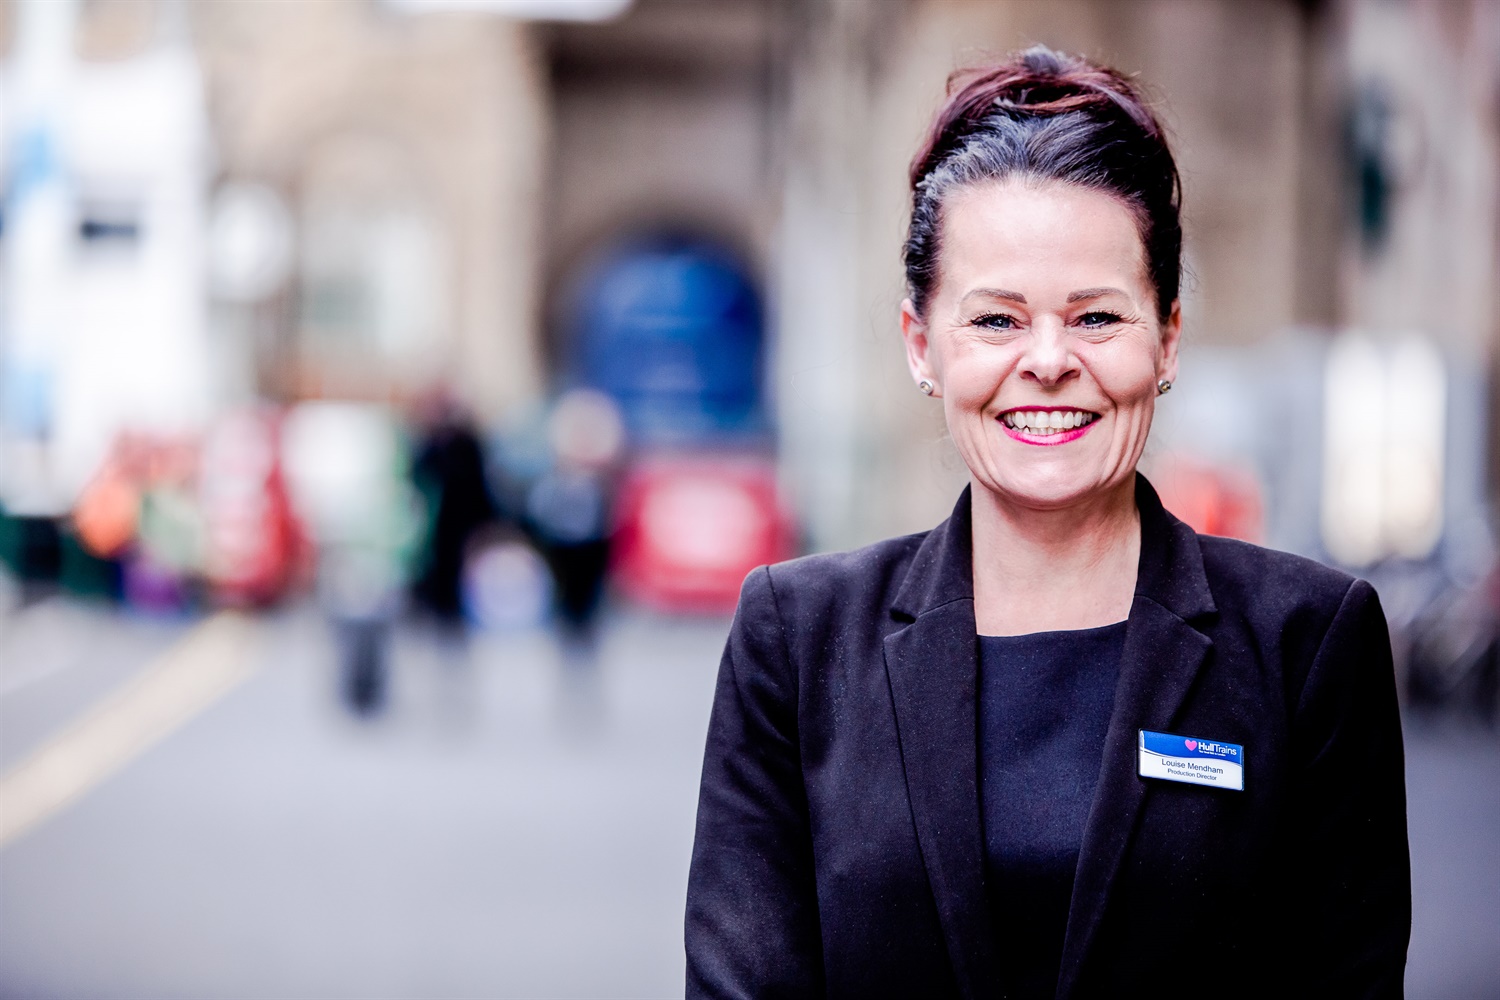 Hull Trains’ Louise Mendham appointed as director after 14 years of delivery